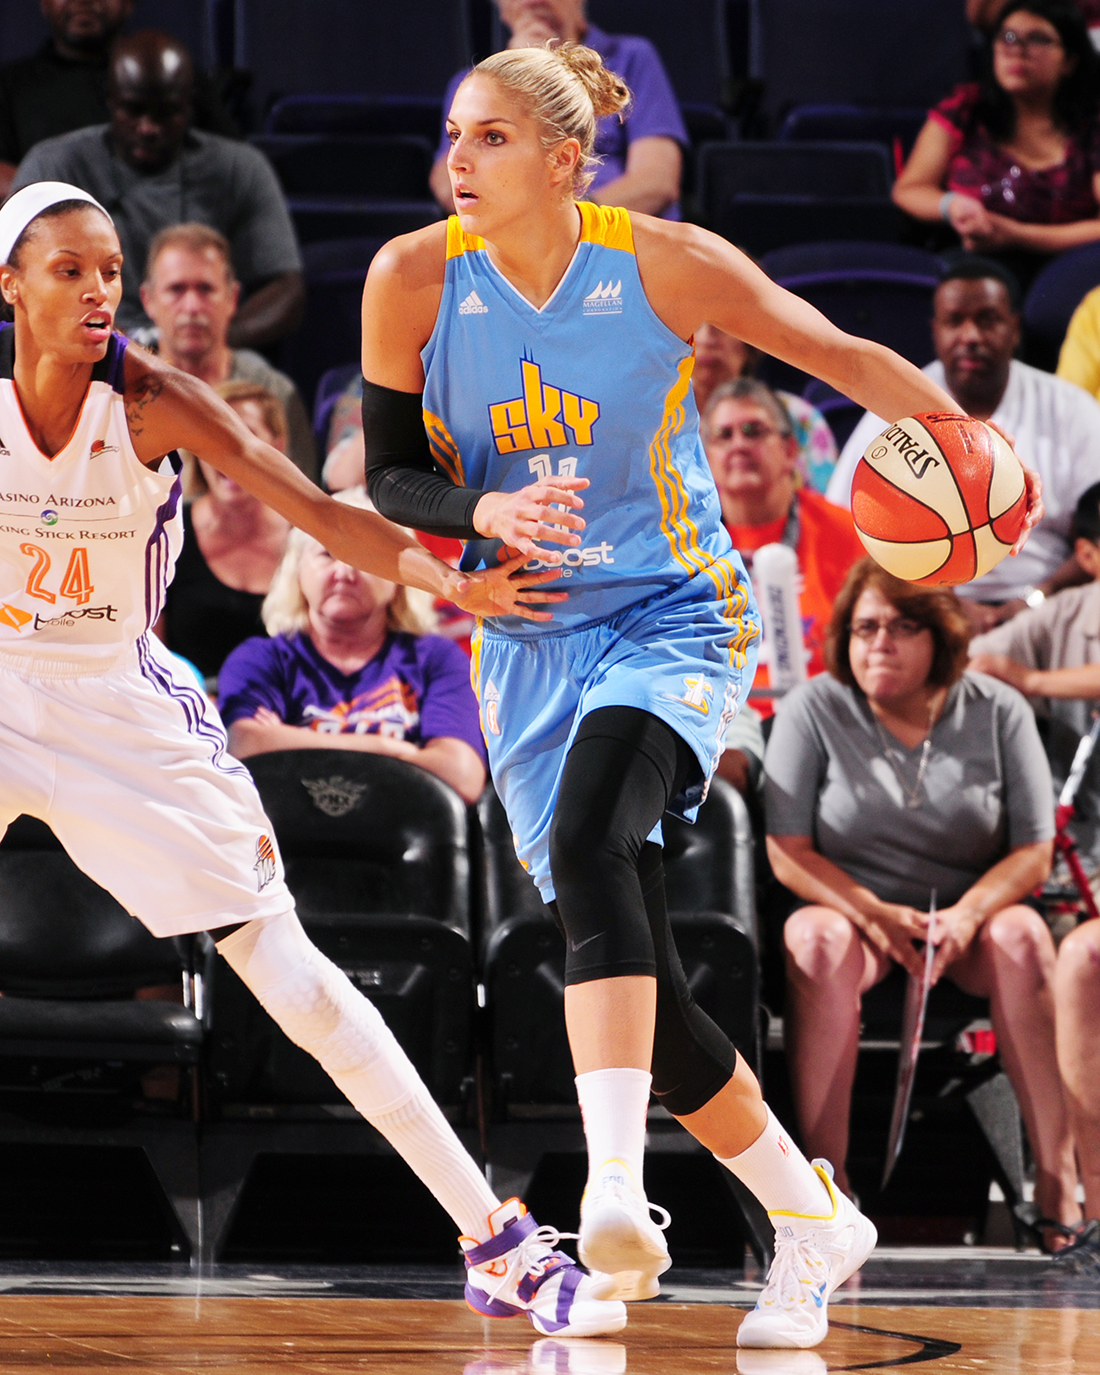 Elena Delle Done Copyright 2015 NBAE (Photo by Barry Gossage/NBAE via Getty Images